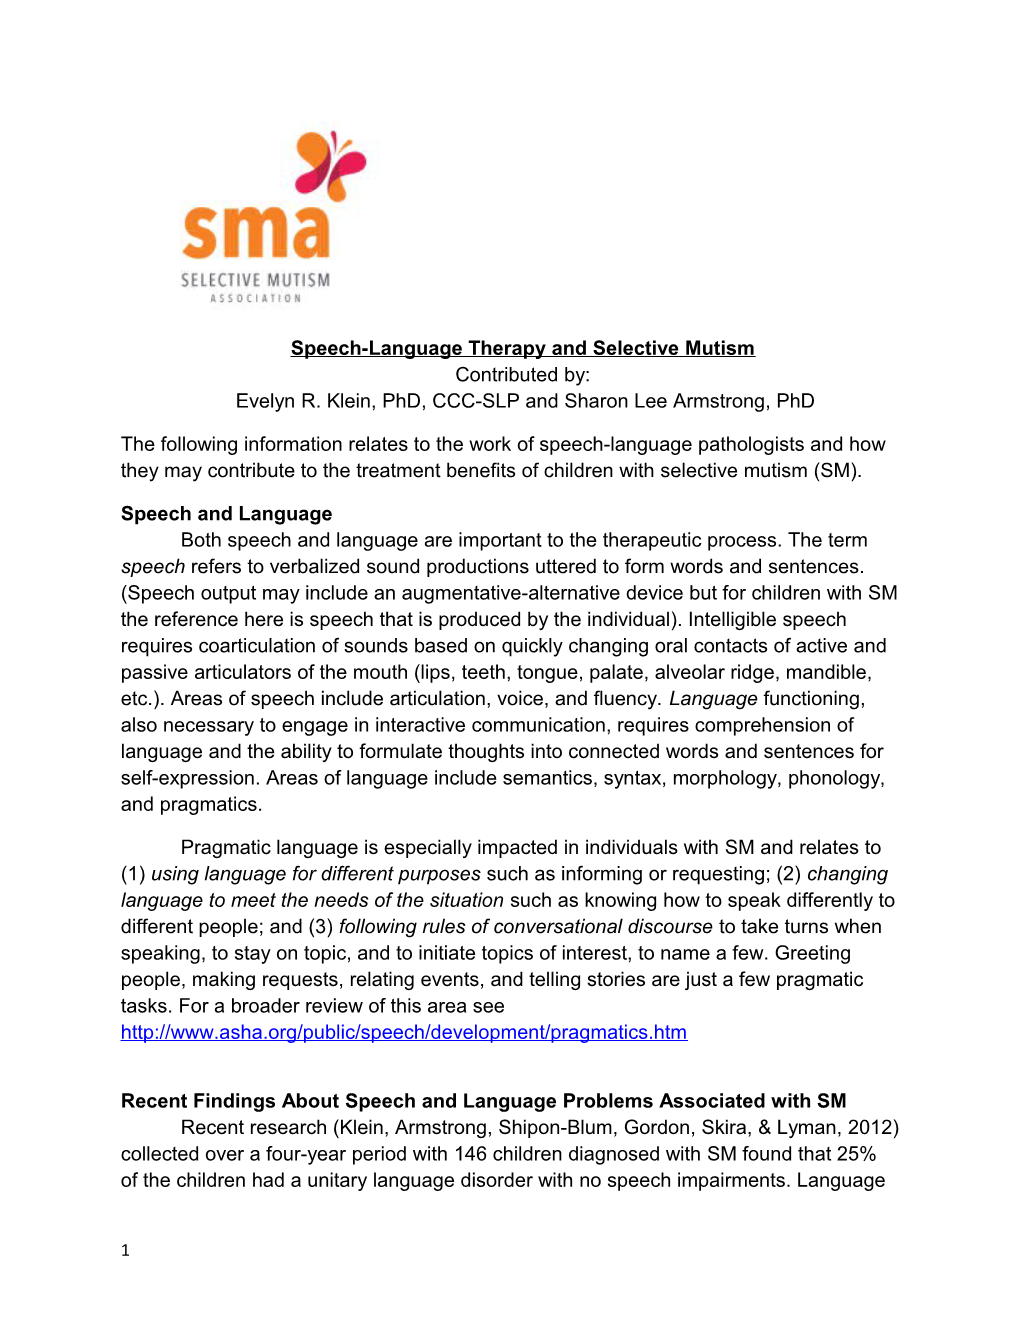 Speech-Language Therapy and Selective Mutism Contributed By: Evelyn R. Klein, Phd, CCC-SLP